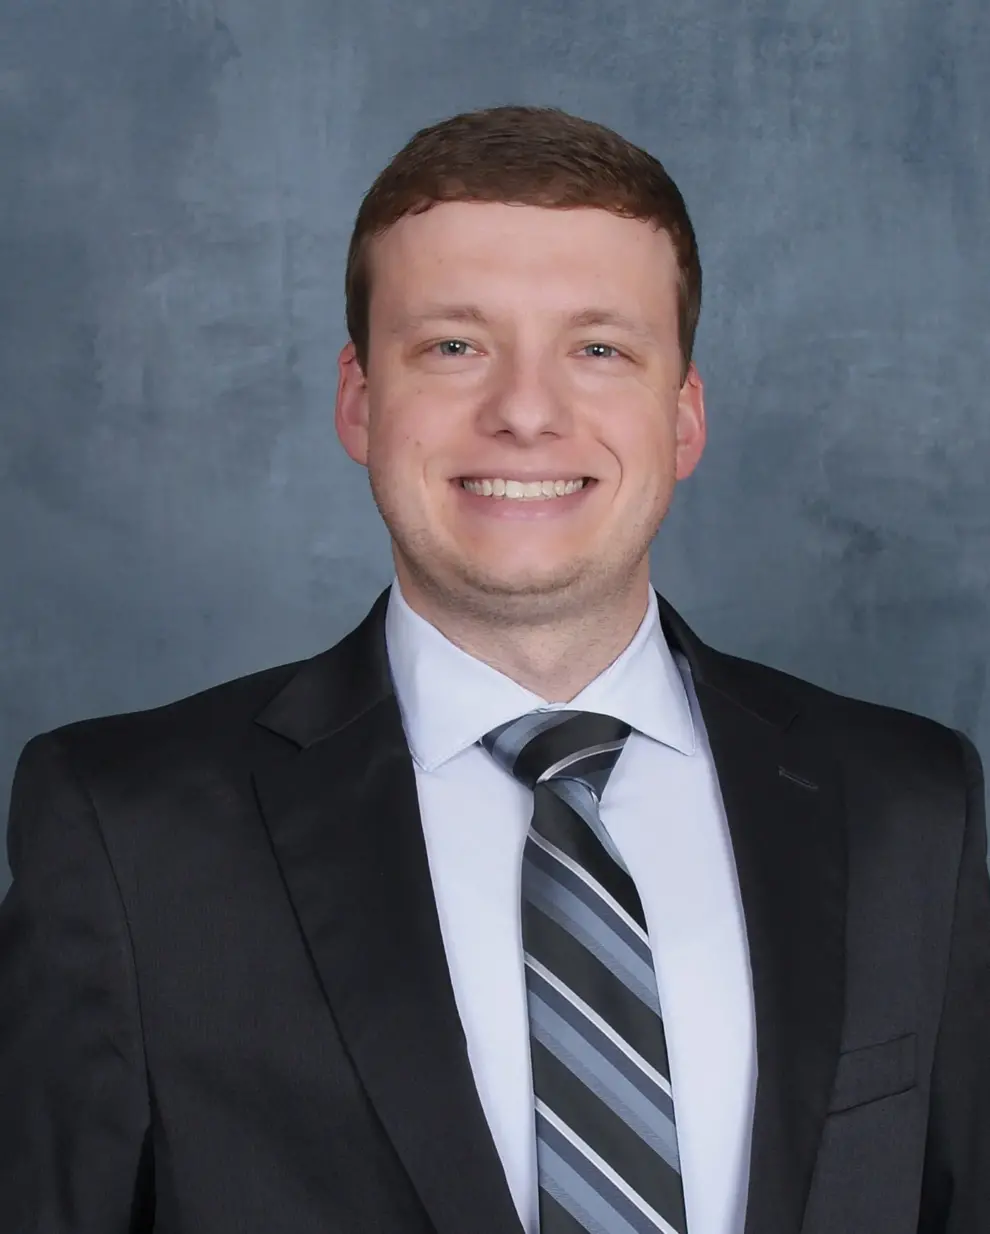 TAYLOR D. HARTMAN RECEIVES PROFESSIONAL ENGINEERING LICENSE